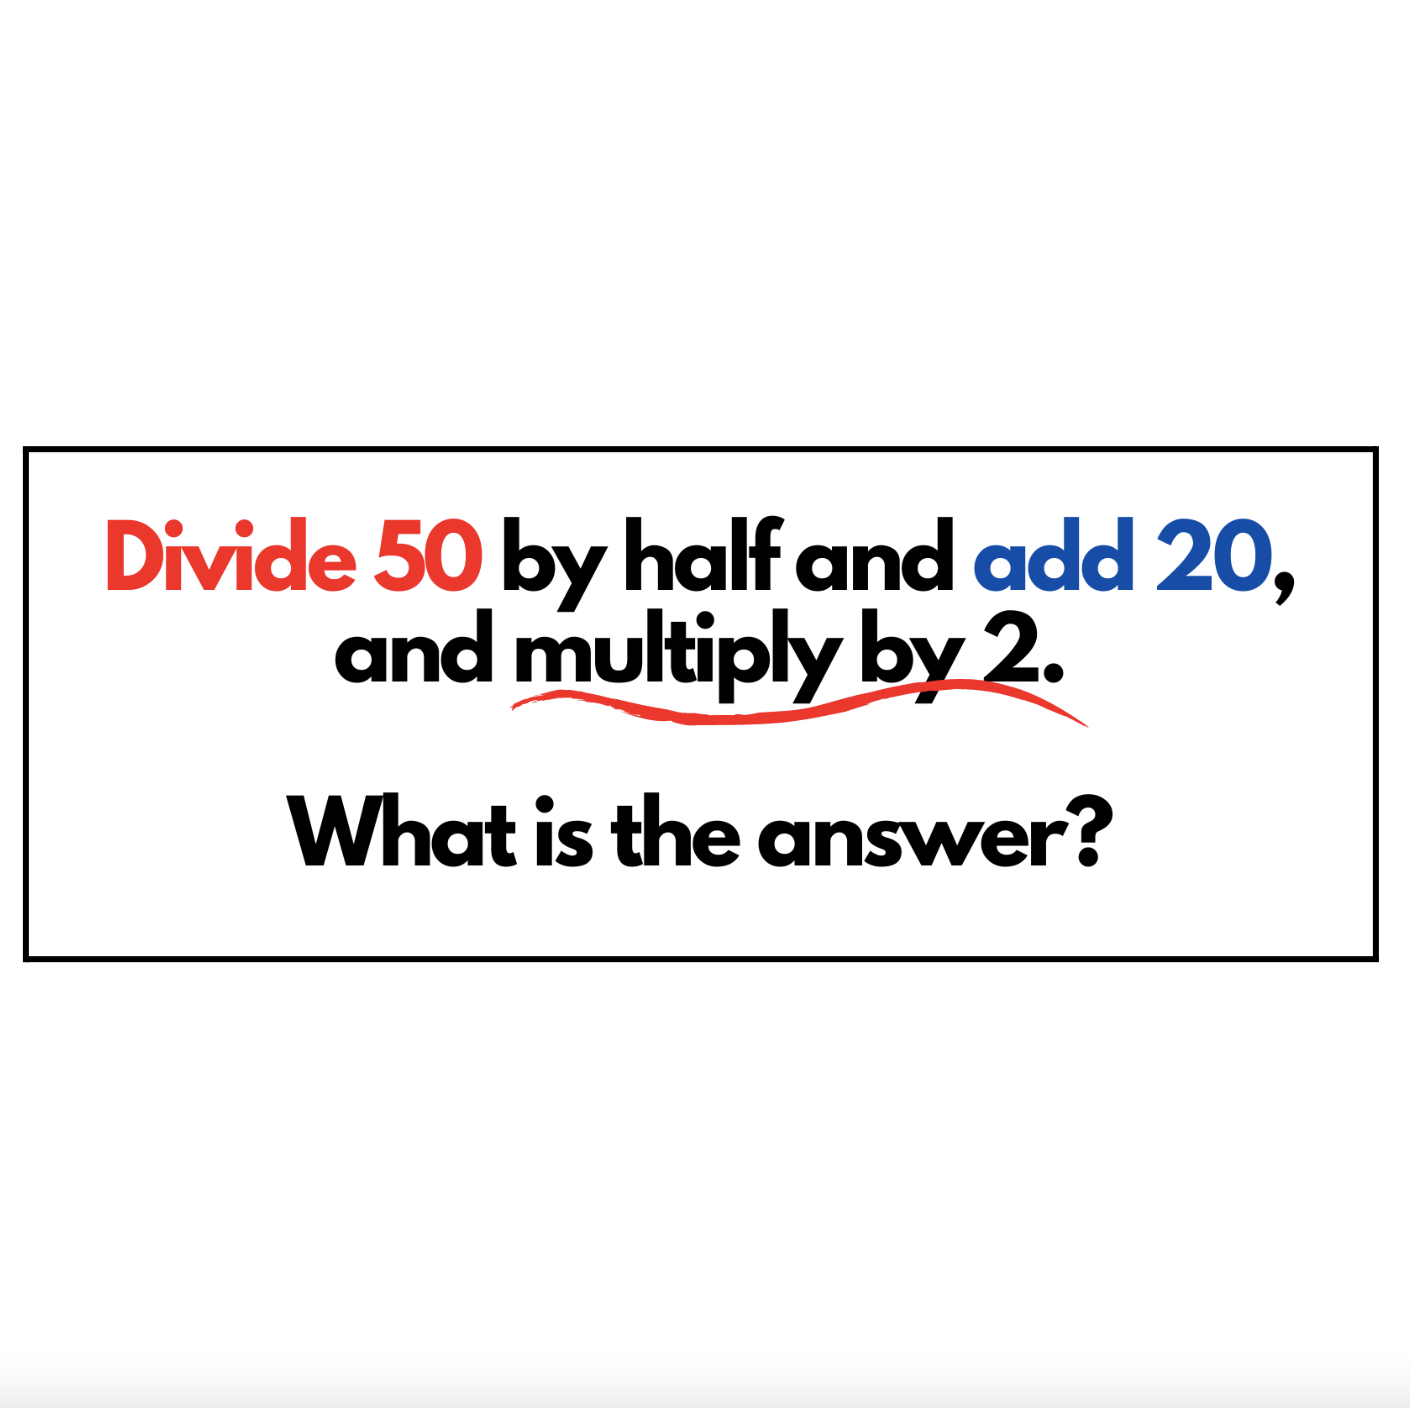 Can You Find the Most Absurd But Logical Answer to This Problem?